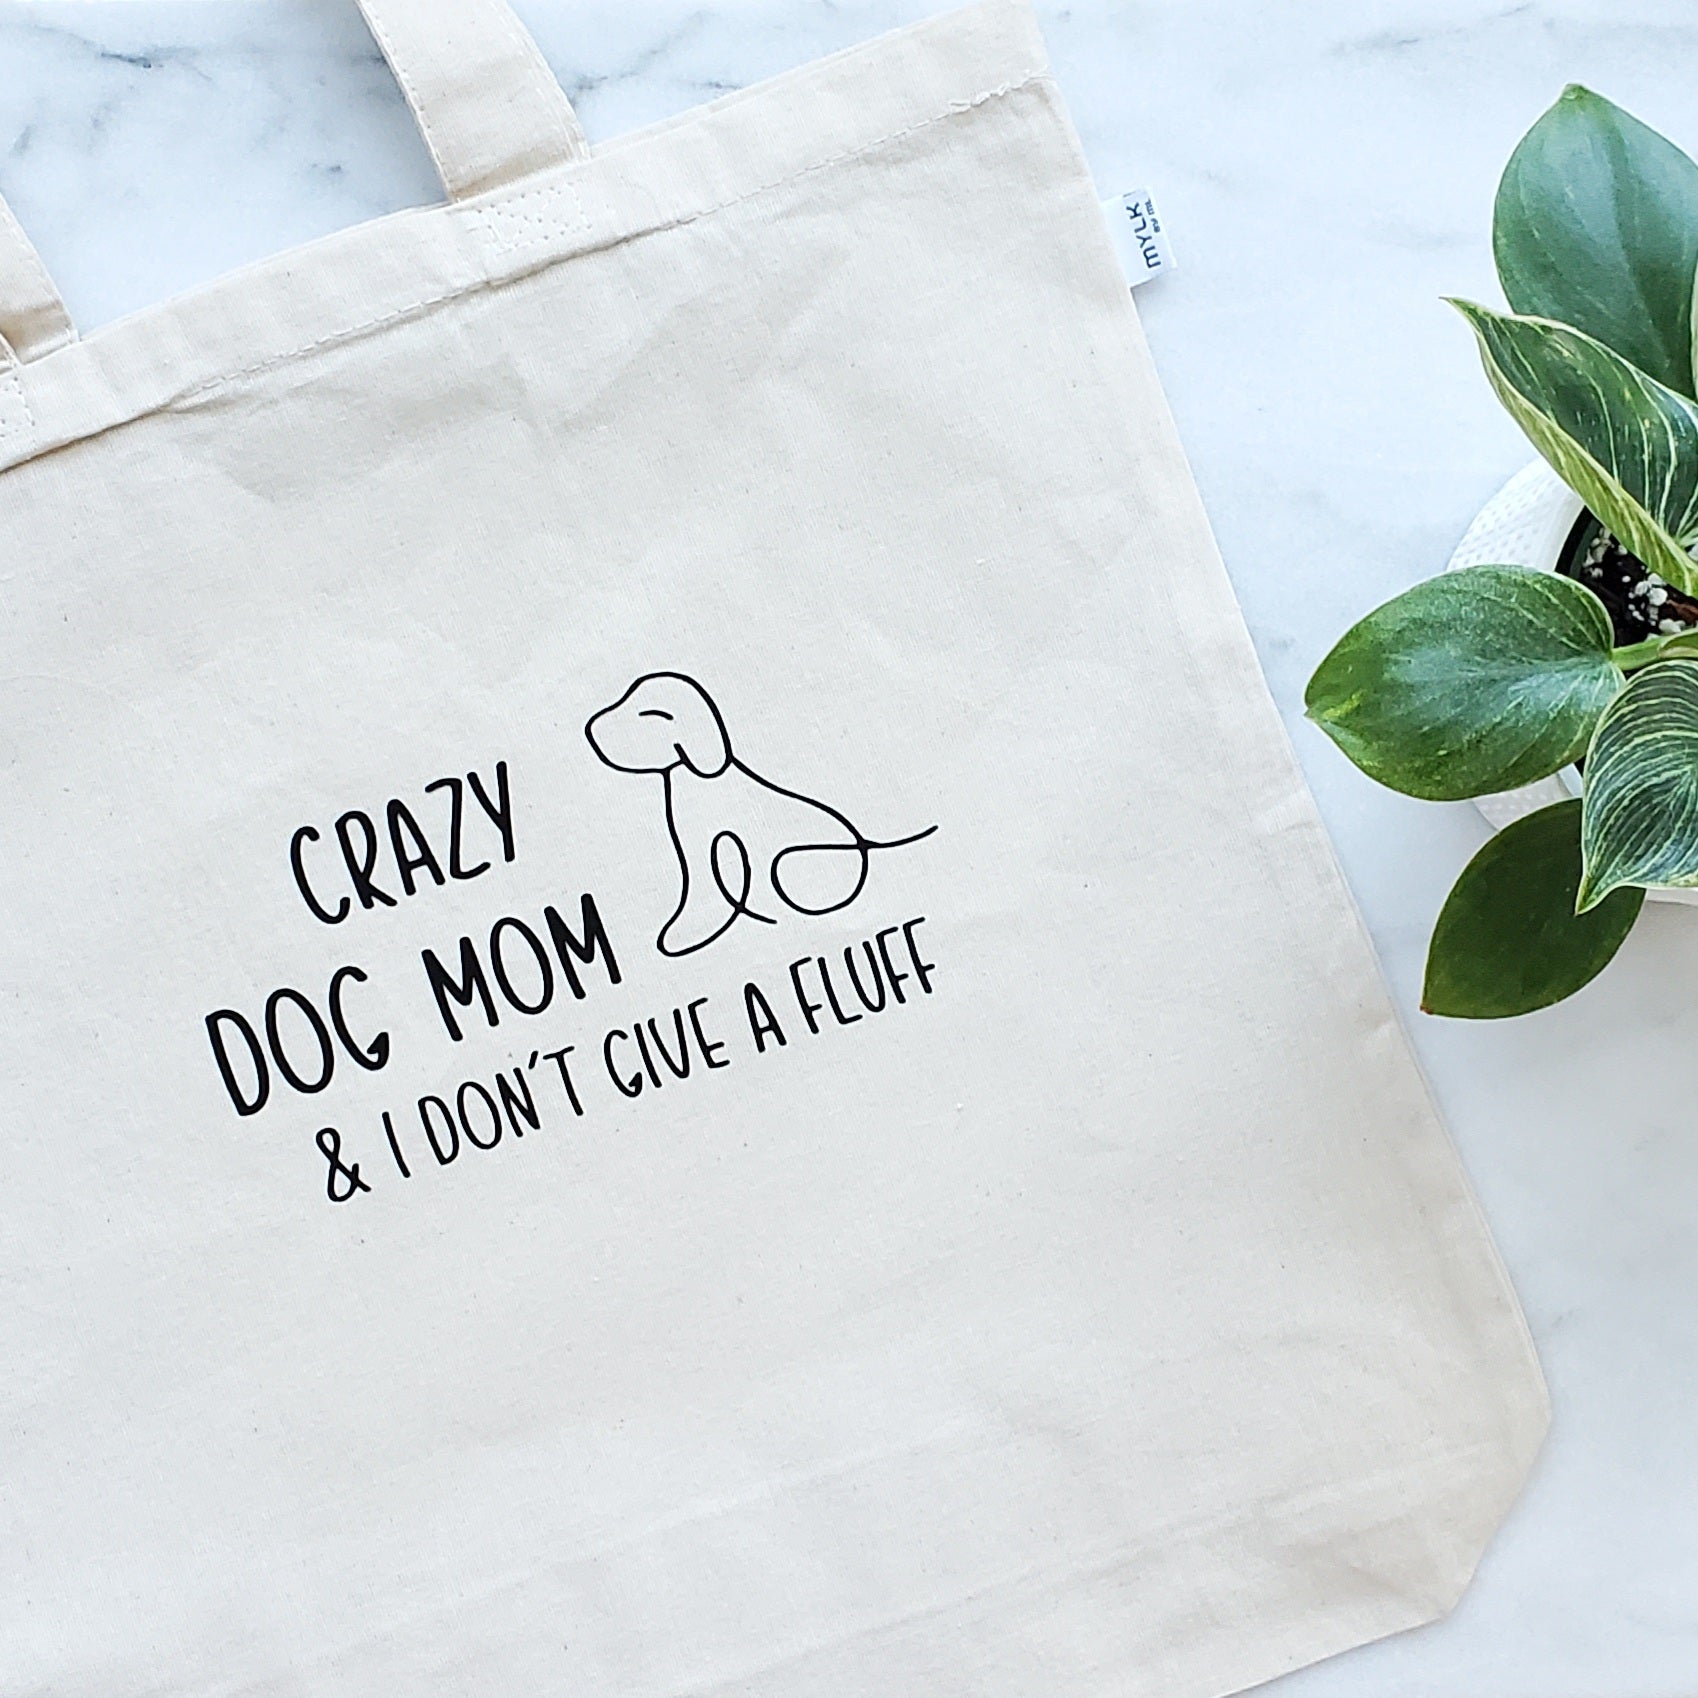 My Dog is My Best Friend Tote Bag – The Crazy Dog Mom